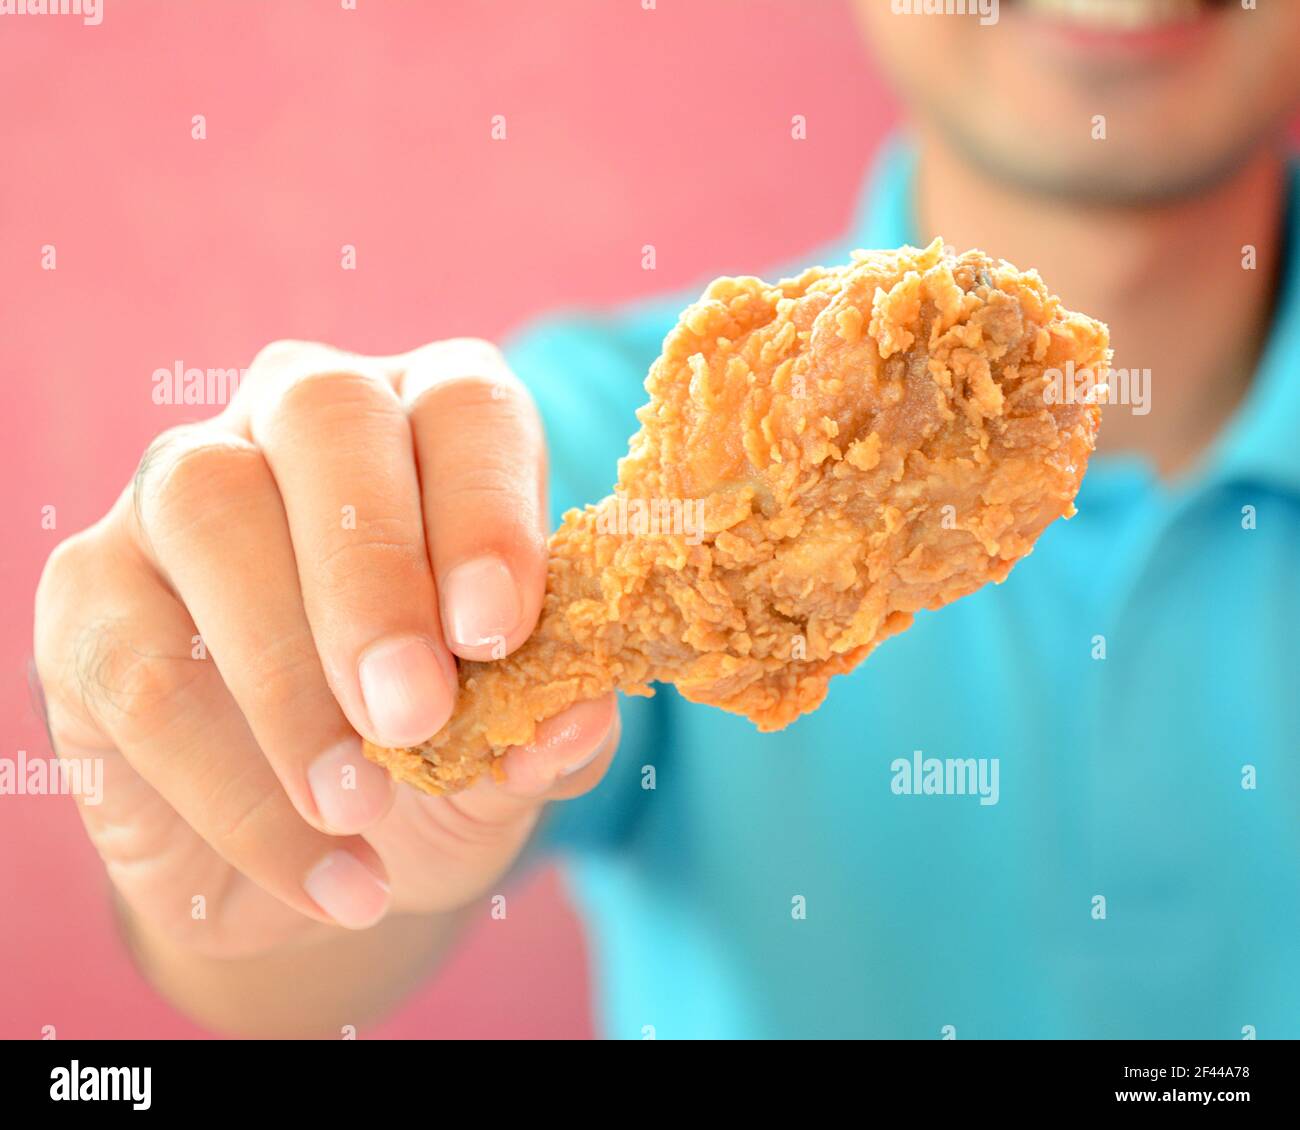 A man giving fried chicken leg or drumstick Stock Photo